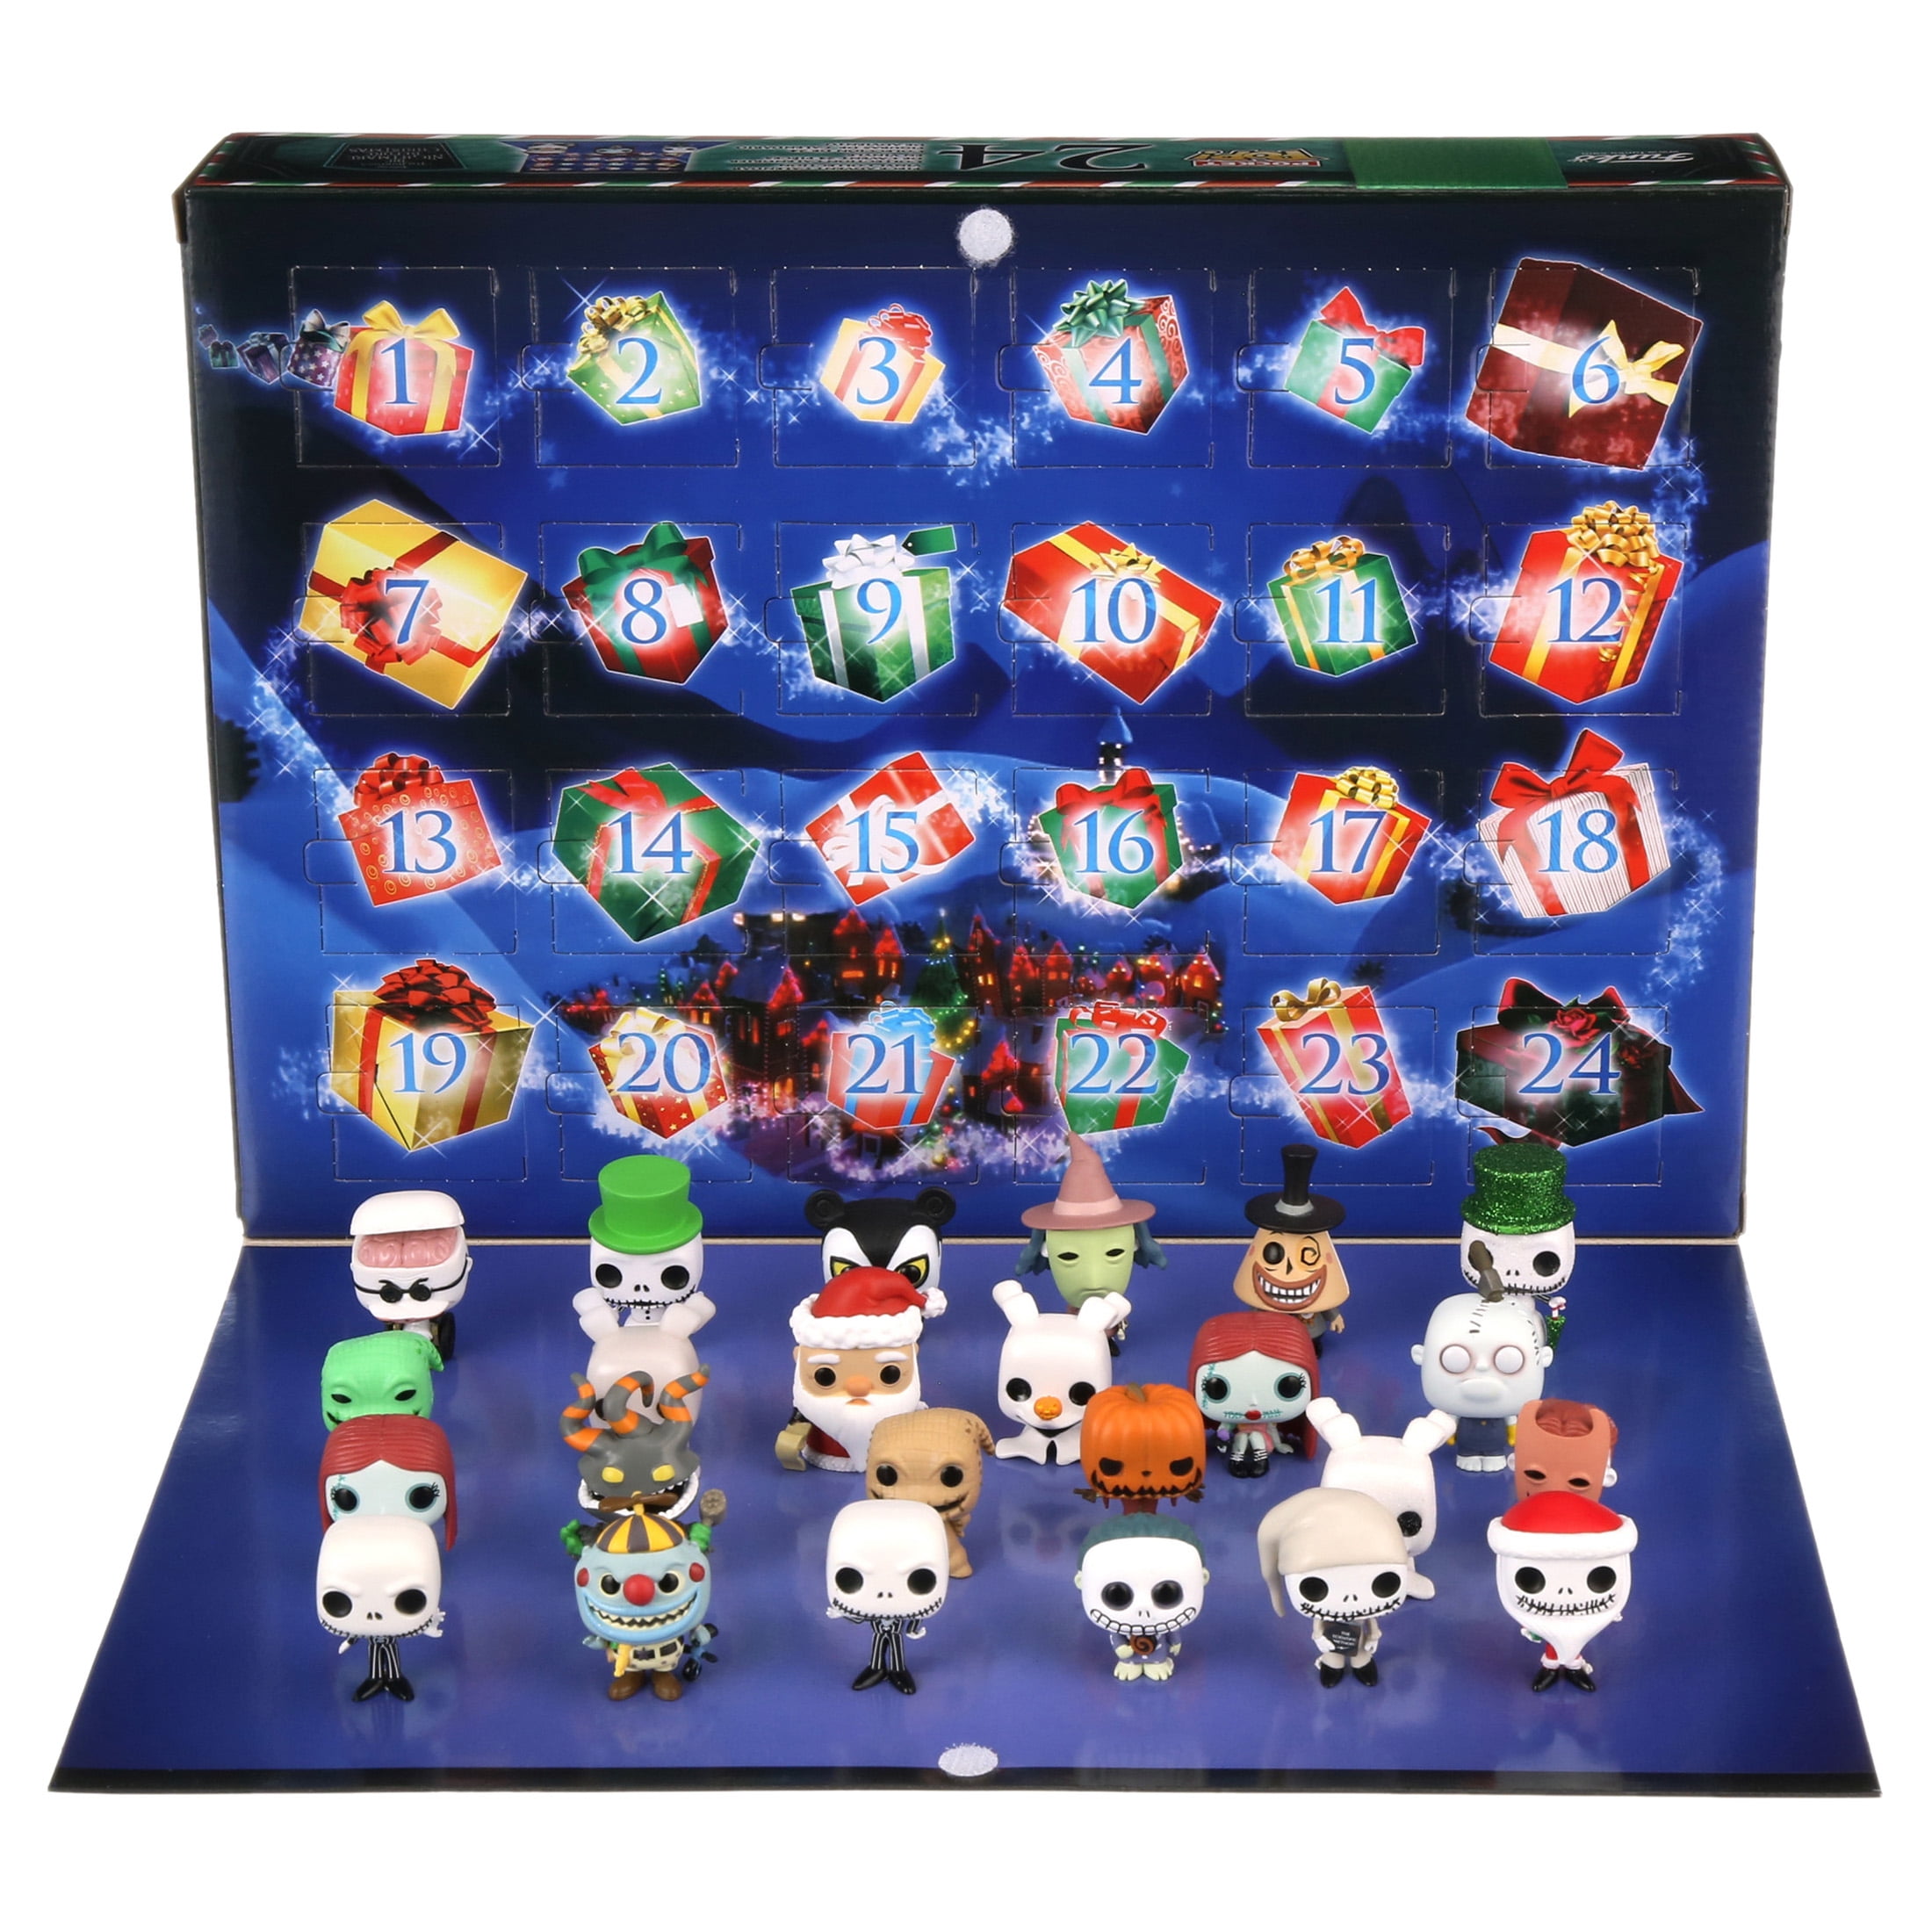 The Nightmare Before Christmas 2020 Funko Advent Cale Toy Funko Advent Calendar 